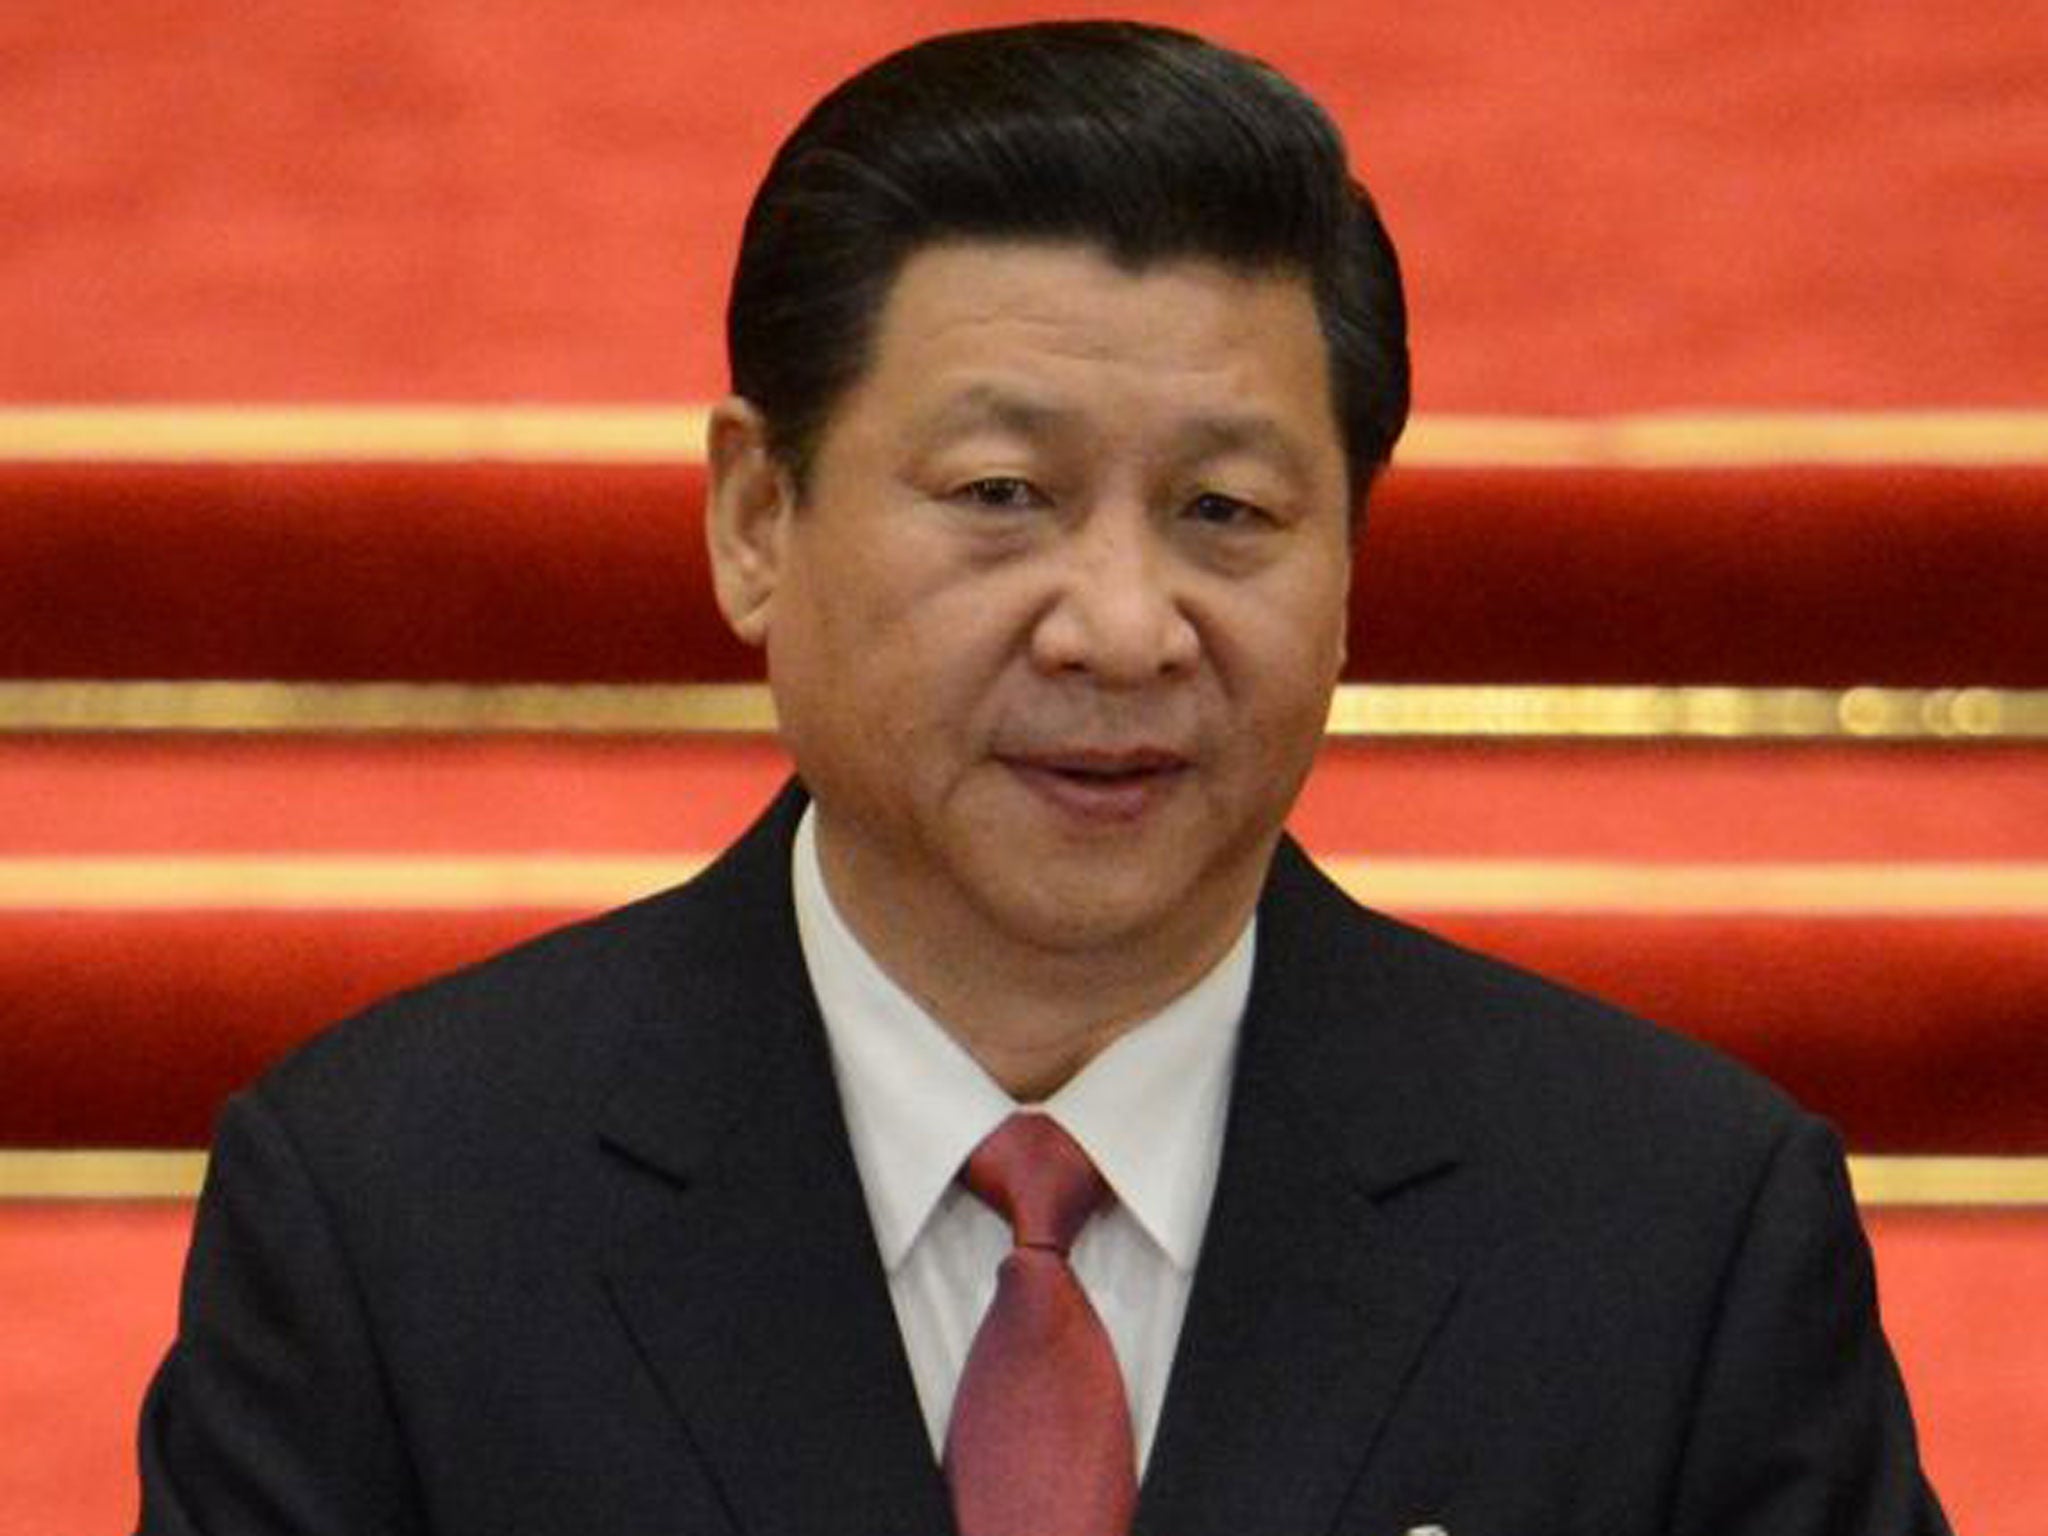 Xi Jinping, who became president in March, is accused of taking China backwards